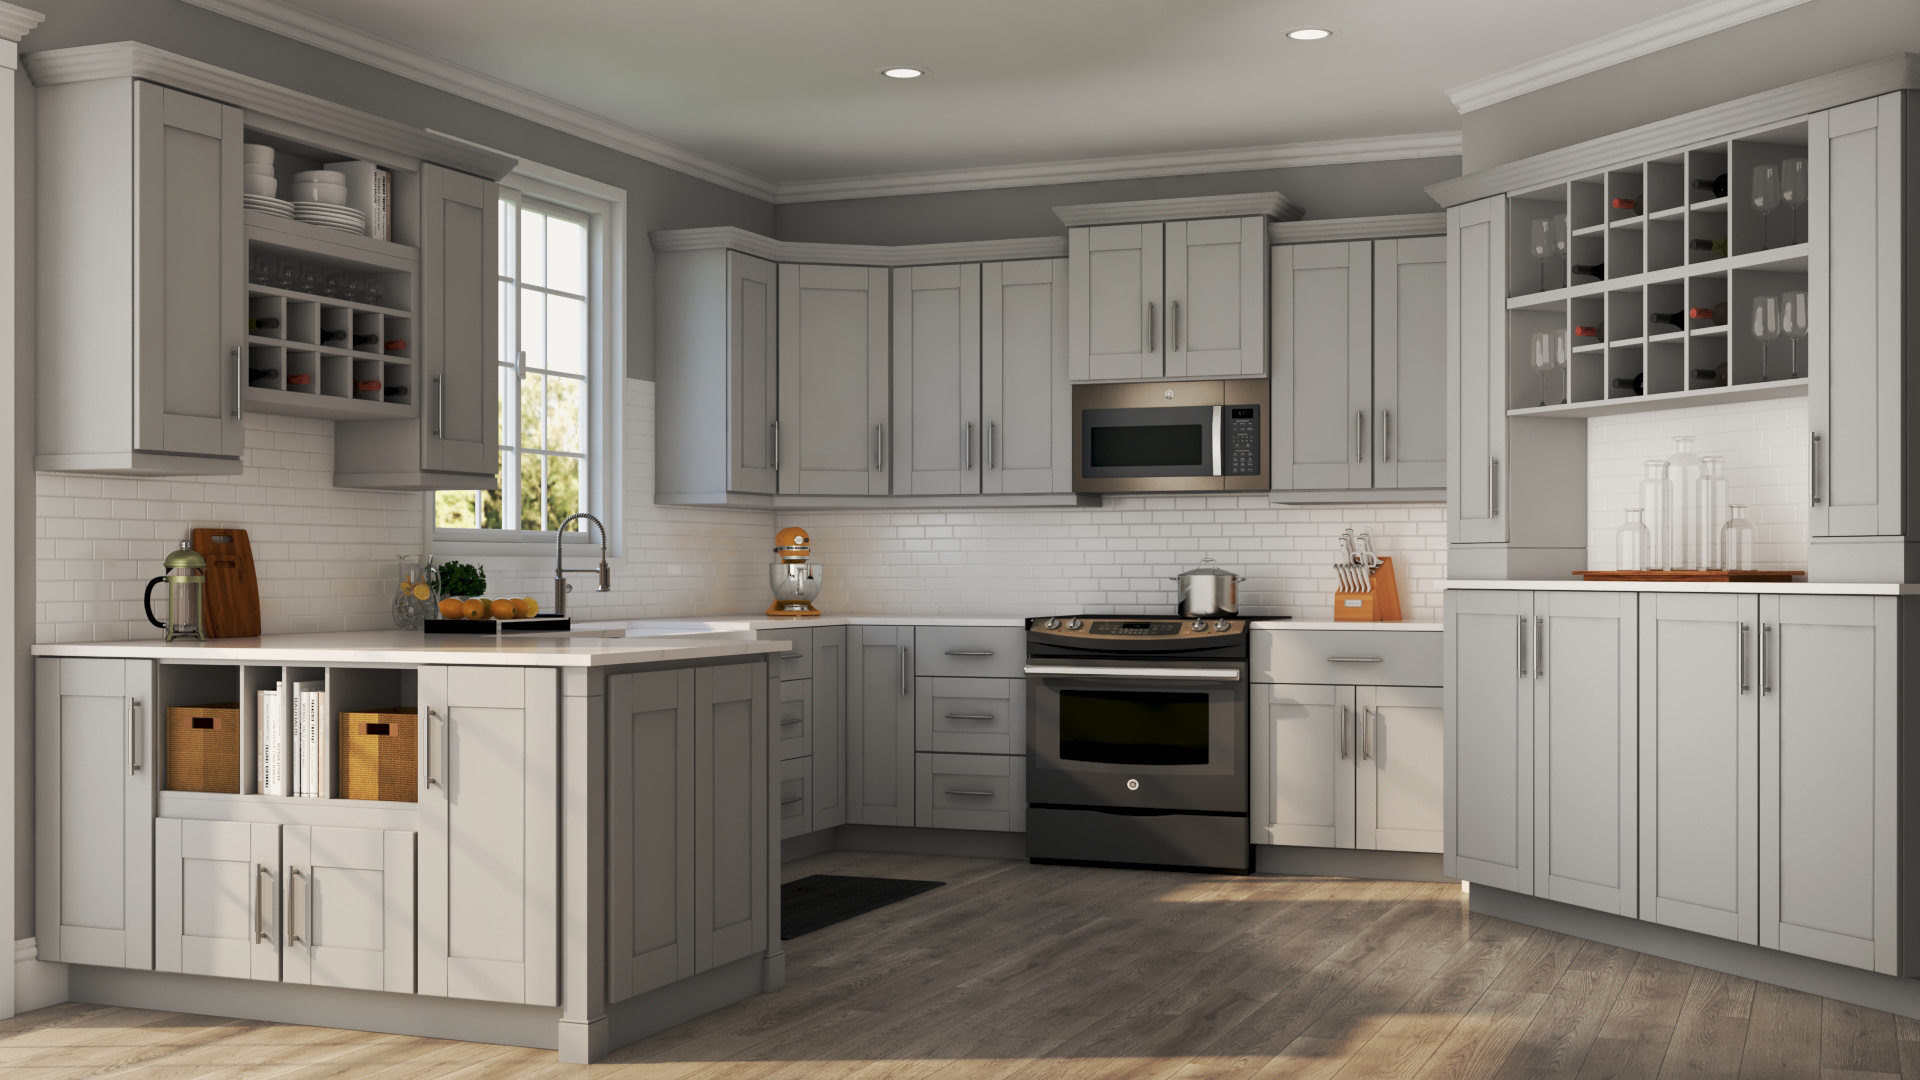 Shaker Specialty Cabinets in Dove Gray – Kitchen – The ...
